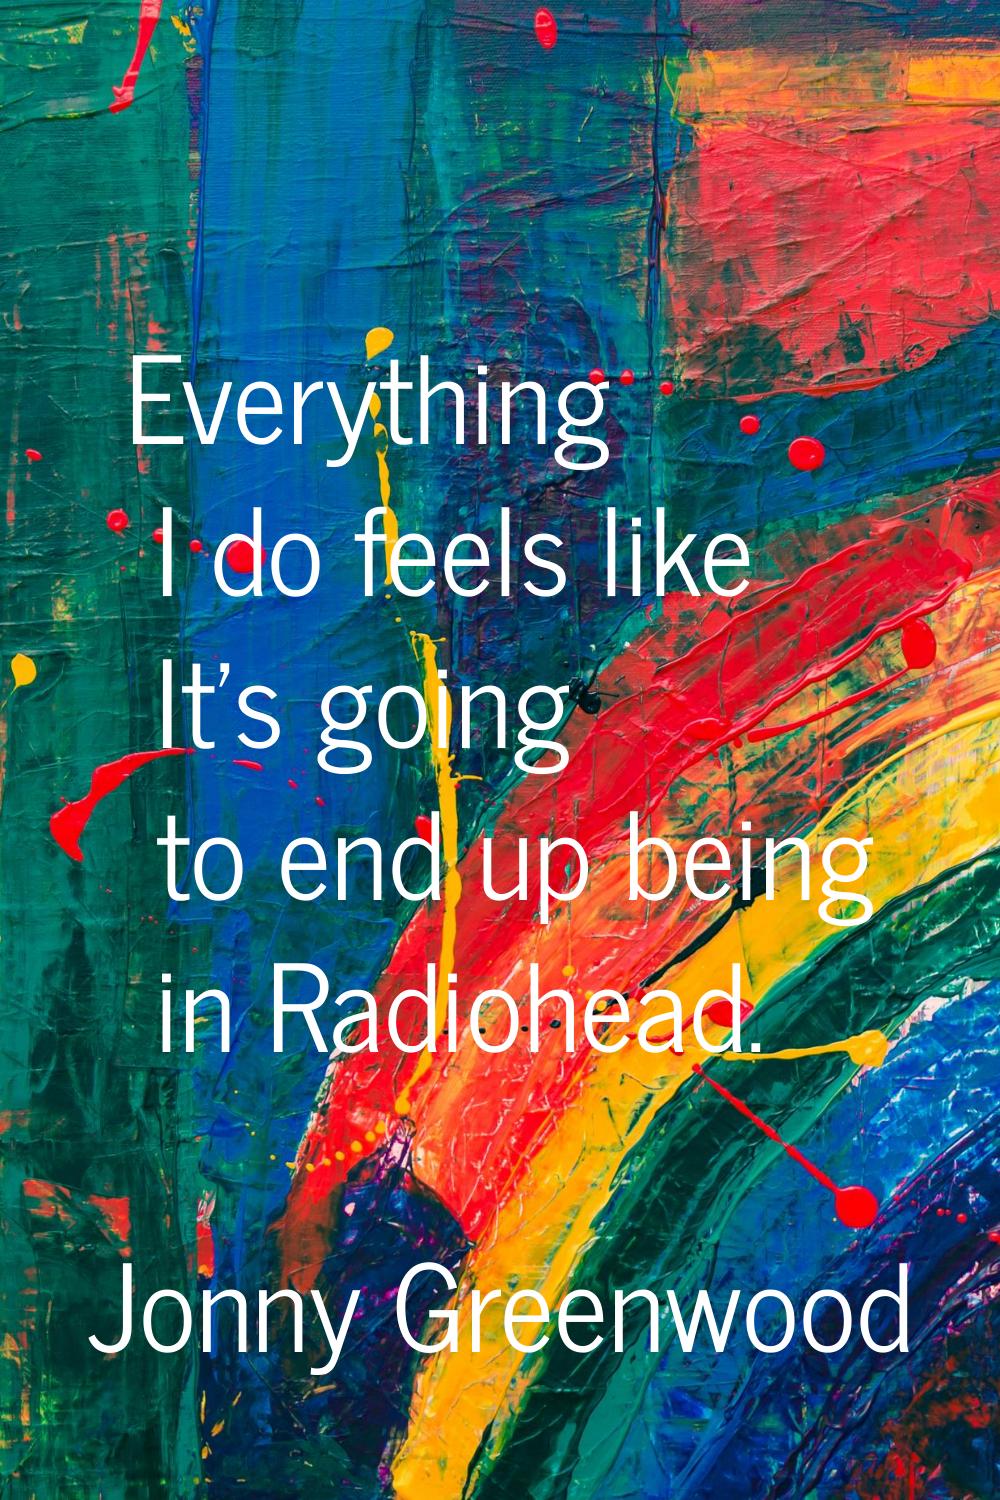 Everything I do feels like It's going to end up being in Radiohead.